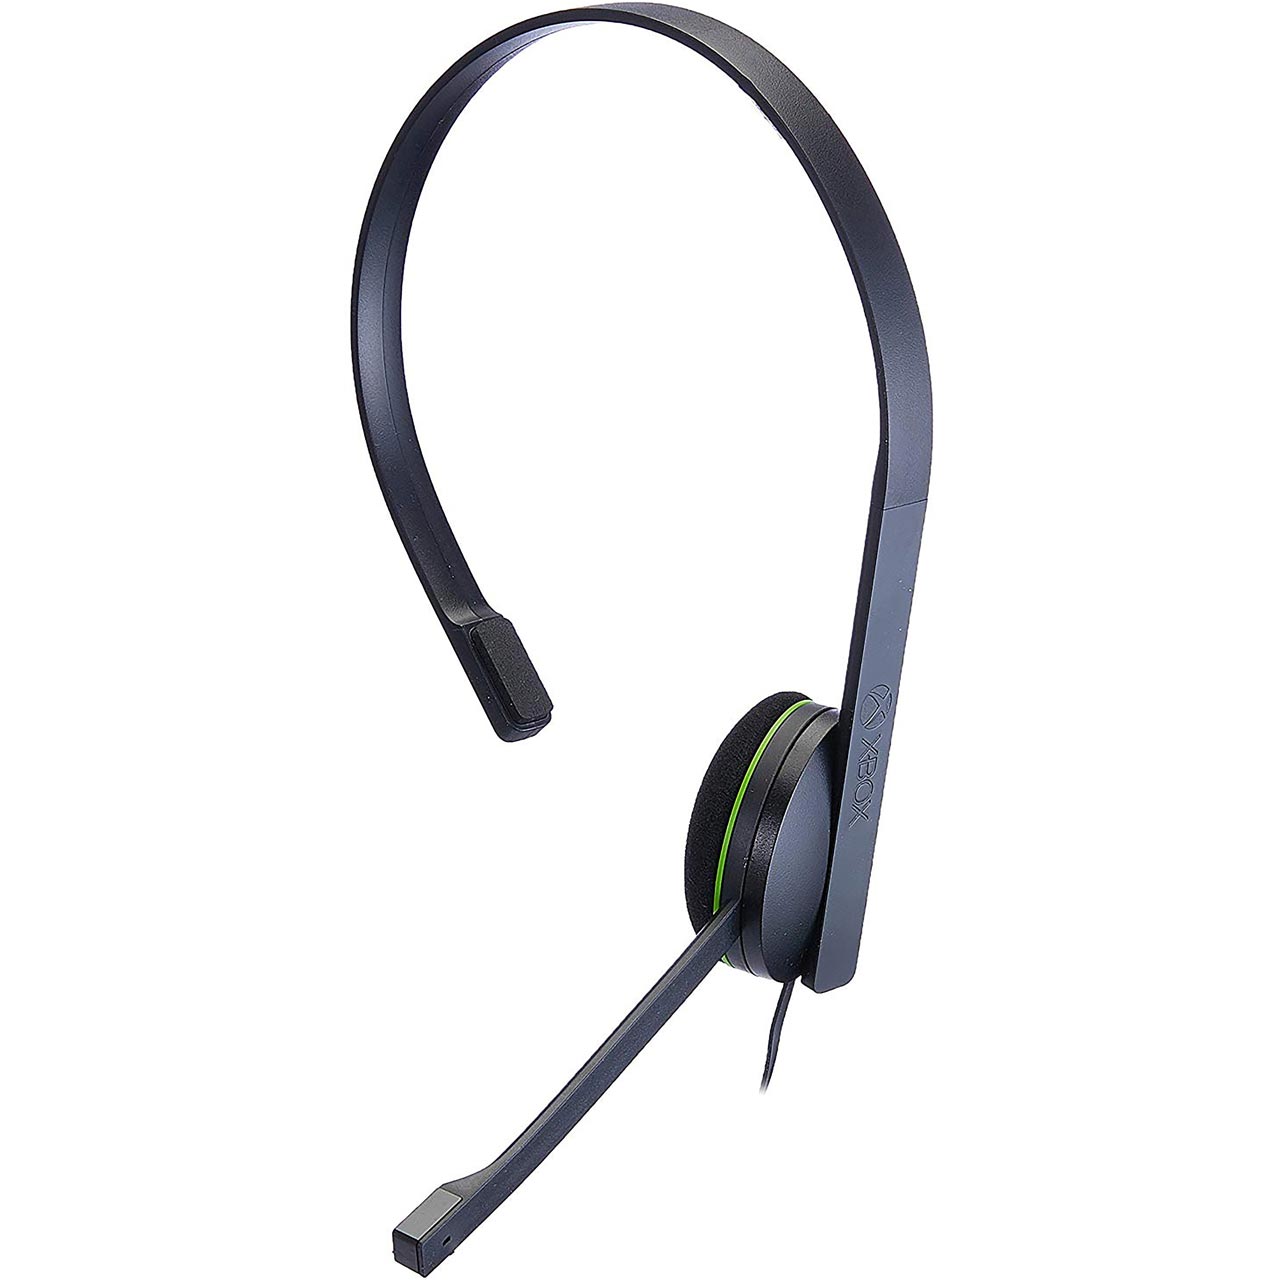 Xbox One Chat On Ear Headset Review